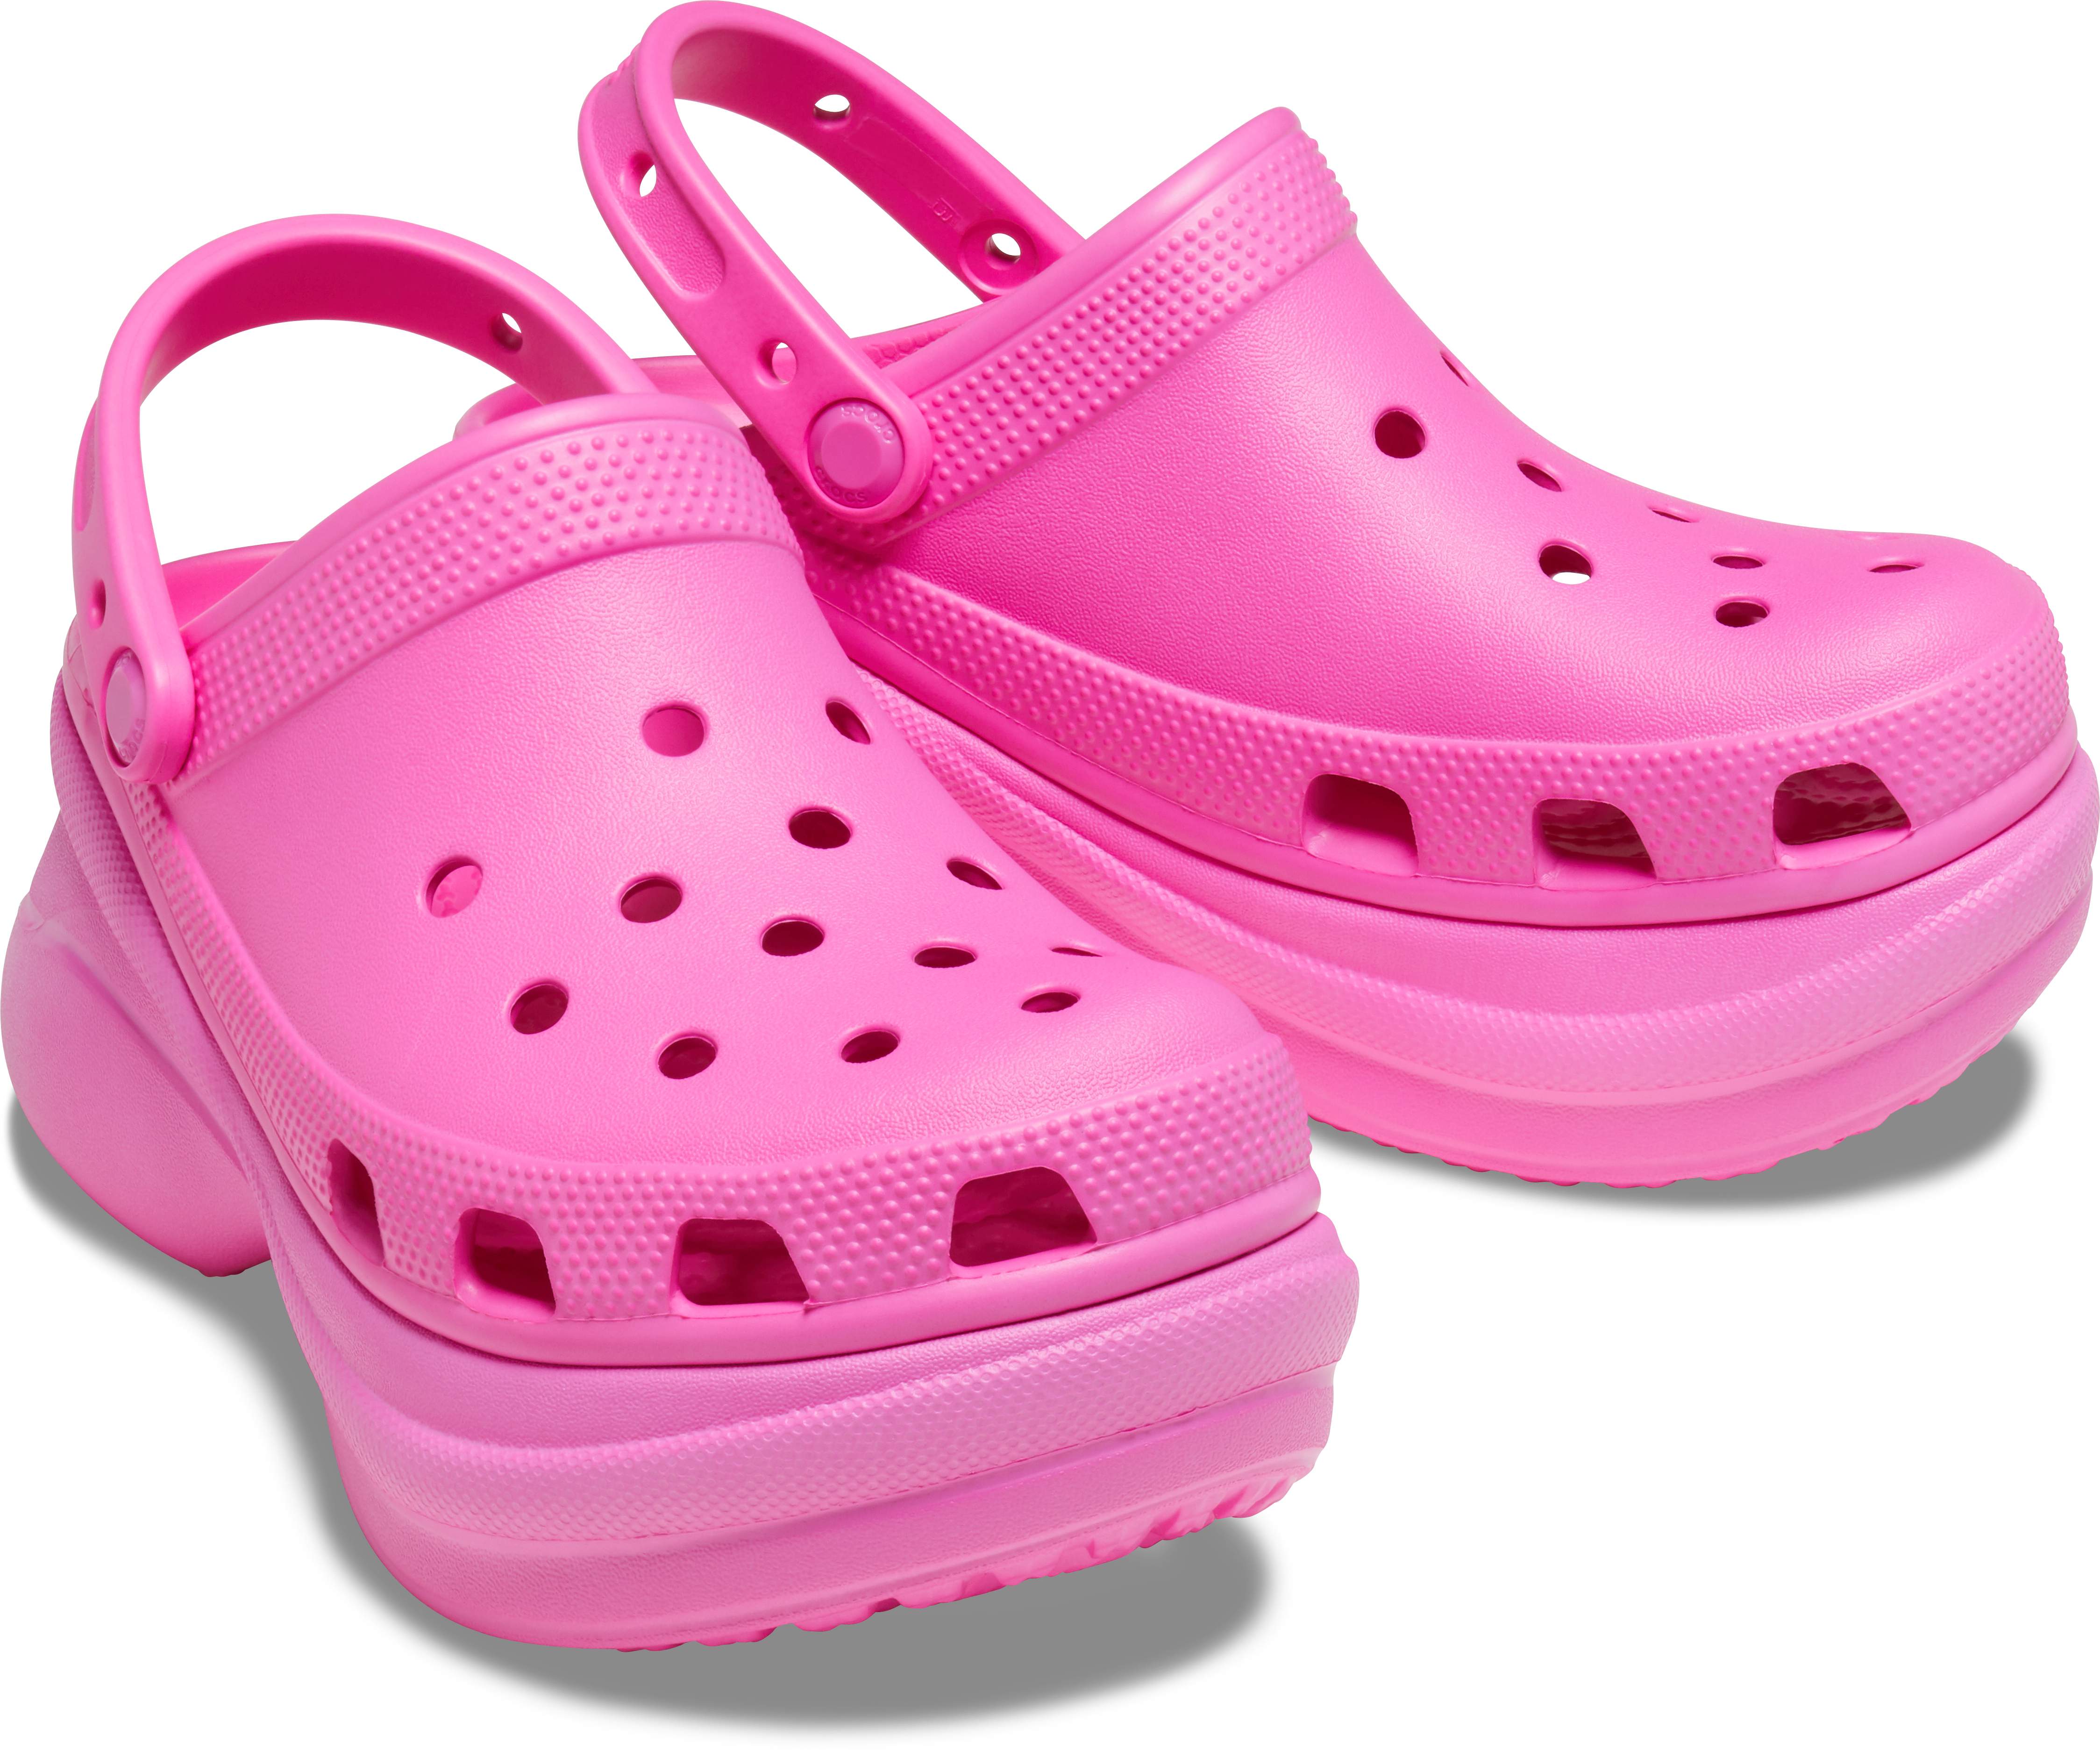 how much are a pair of crocs